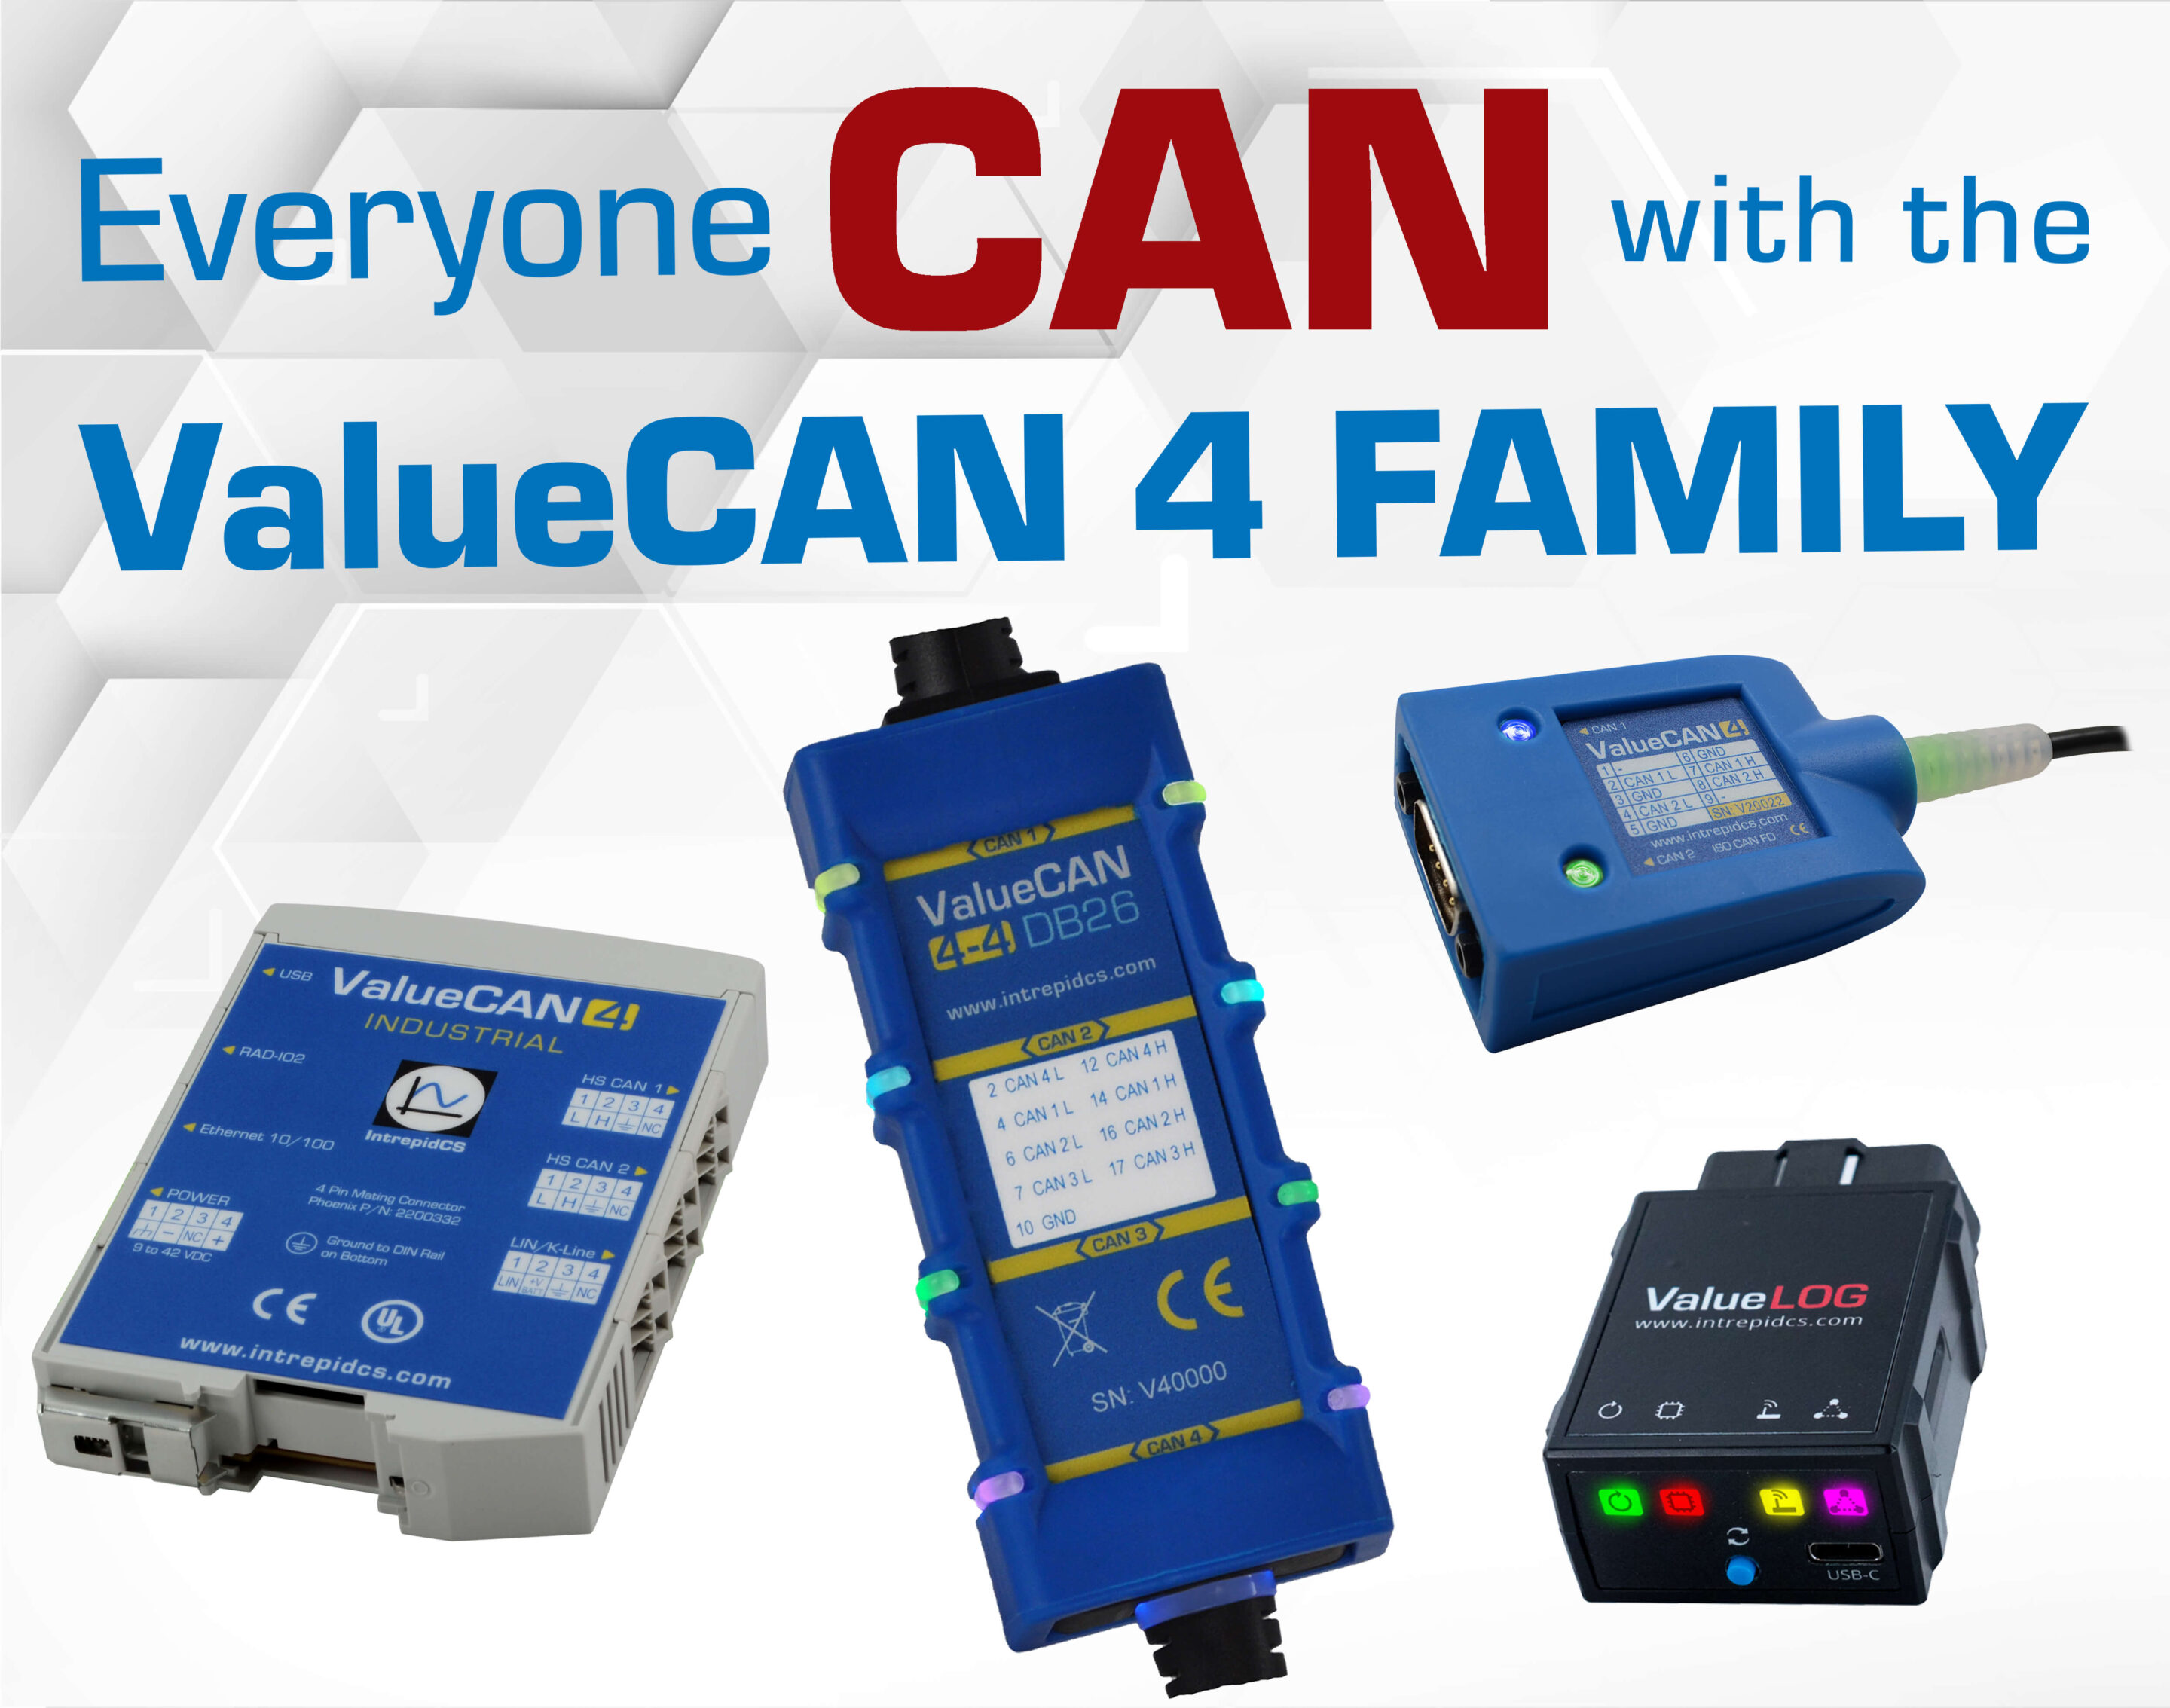 Everyone CAN with ValueCAN 4 Family